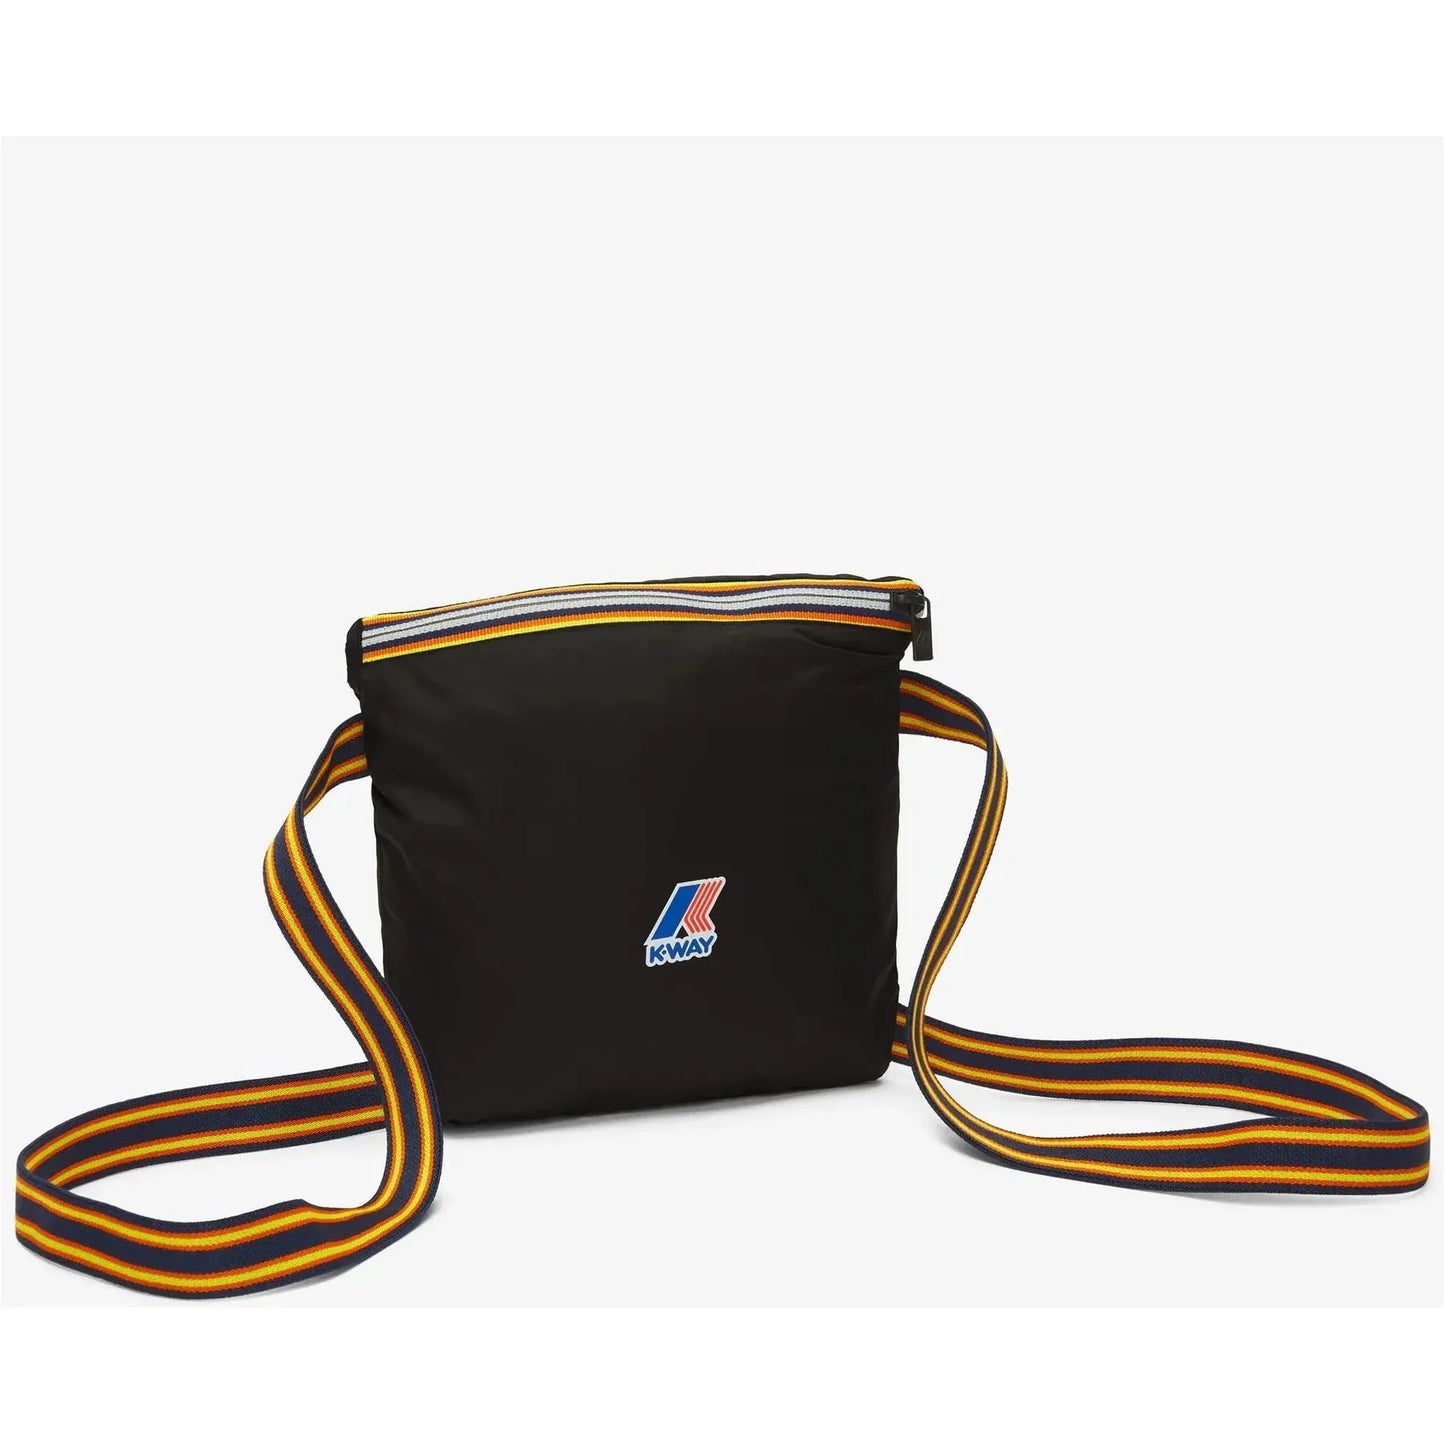 A black K-Way crossbody bag with yellow and orange striped straps, featuring the brand's logo on the front and made from ripstop fabric.